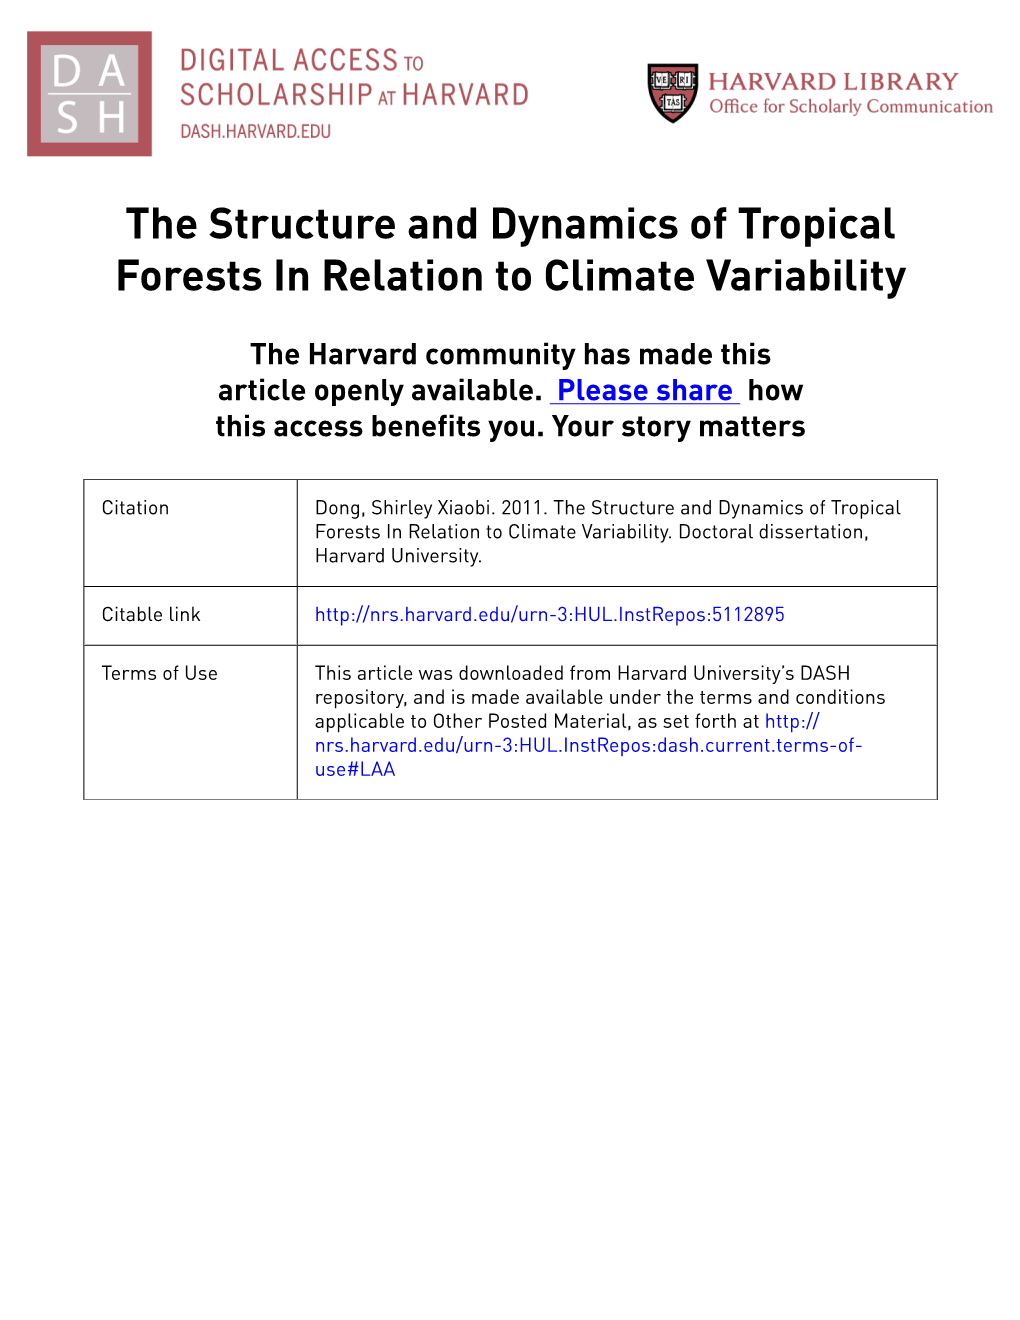 The Structure and Dynamics of Tropical Forests in Relation to Climate Variability